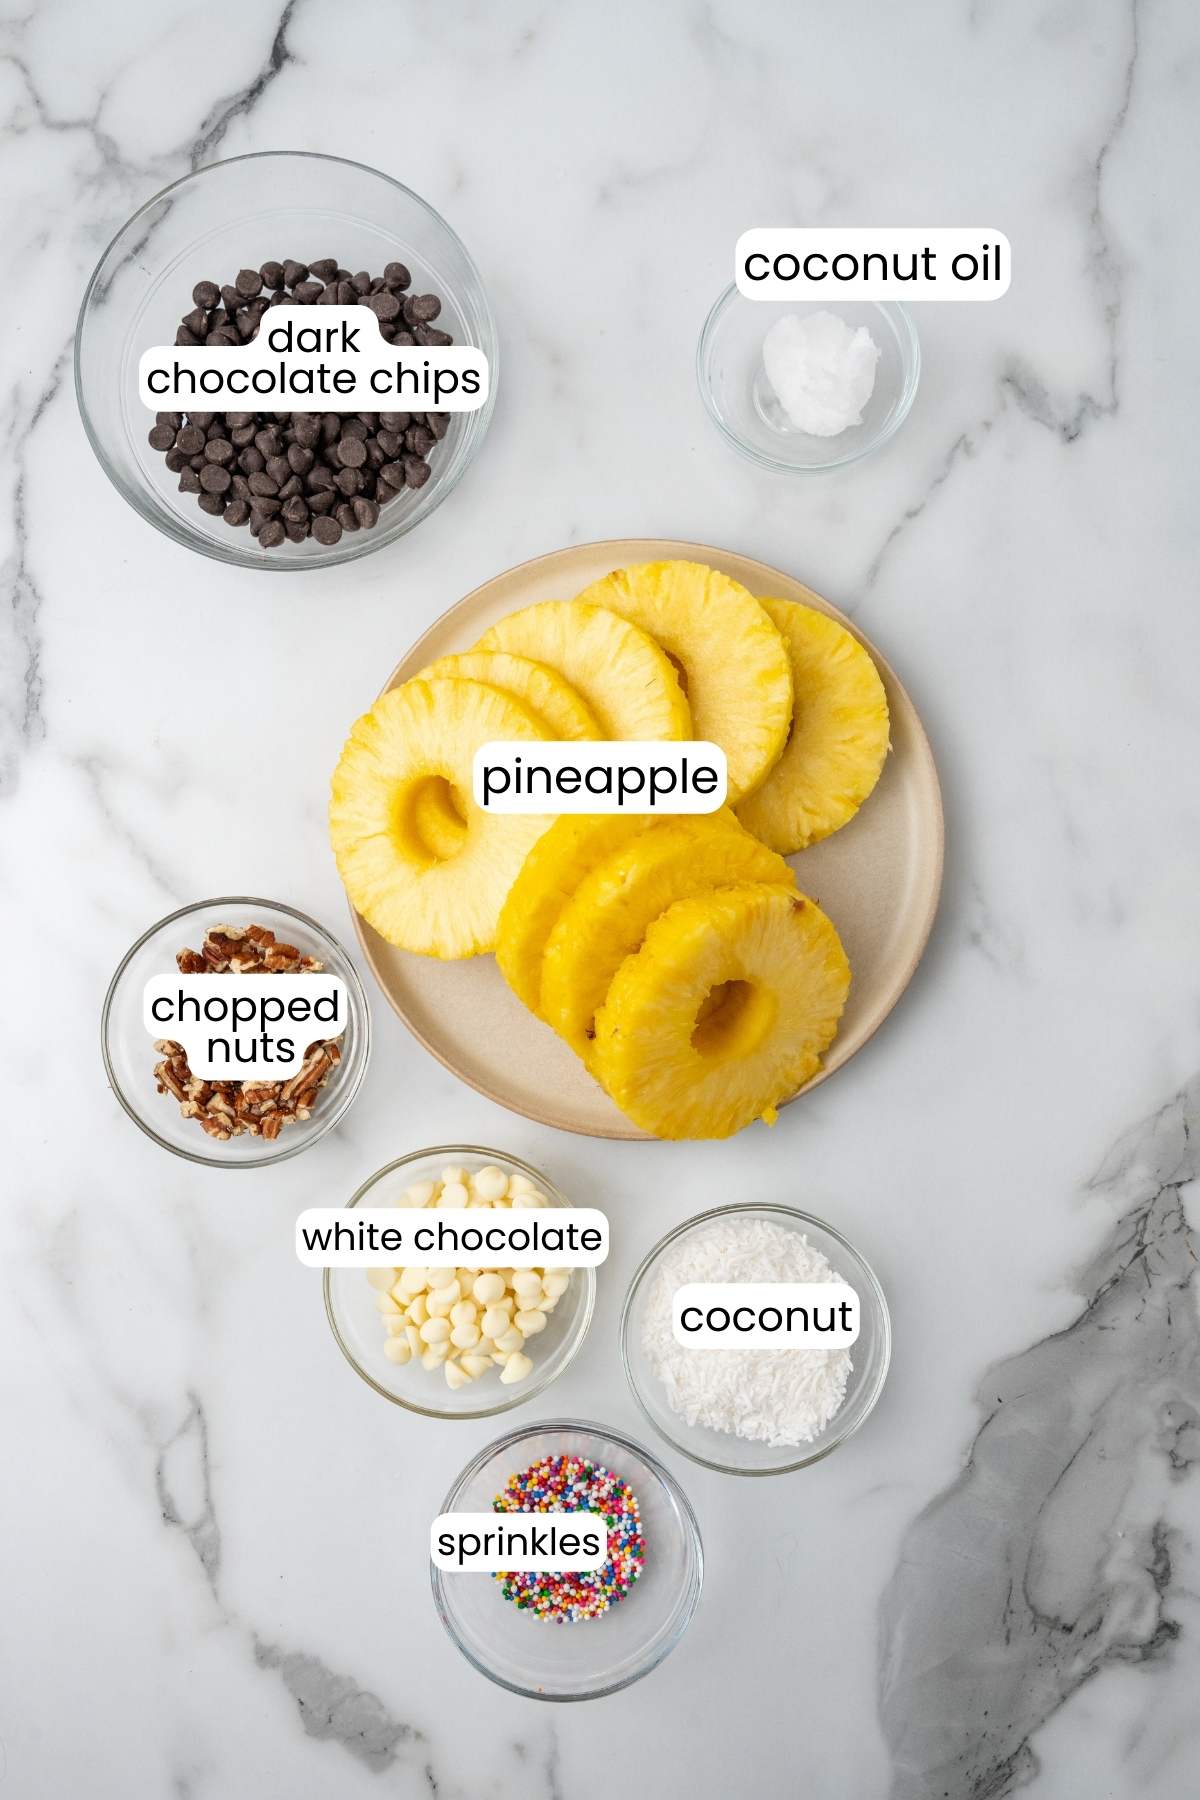 Ingredients for chocolate covered pineapple on a marble countertop.